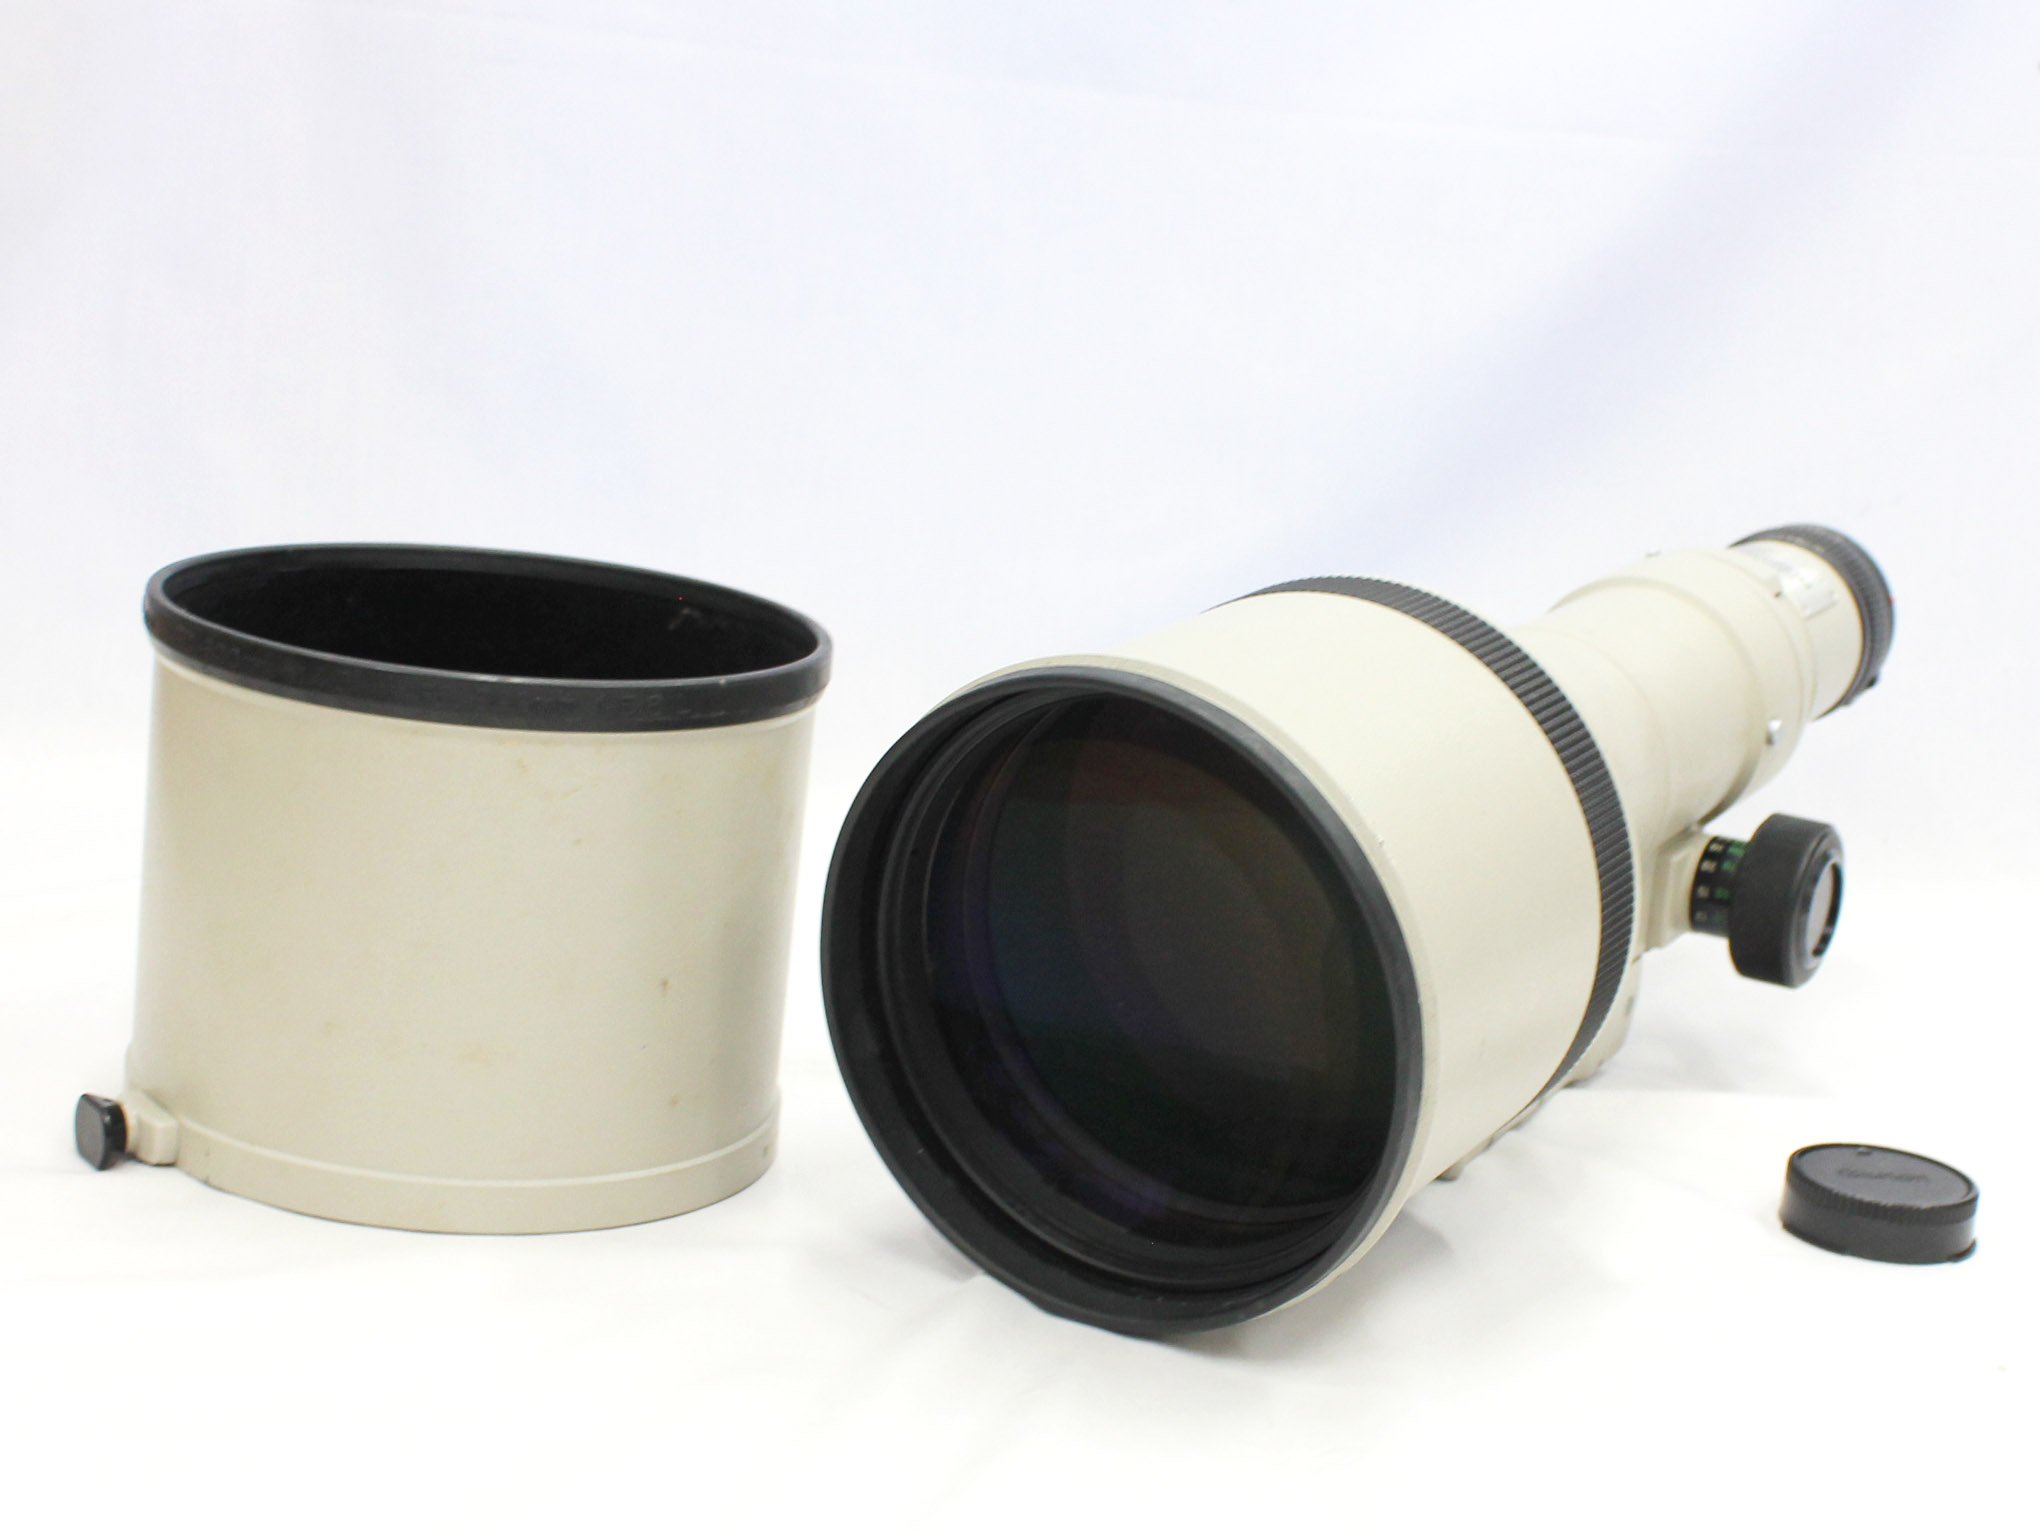 Japan Used Camera Shop | [Excellent+++++] Canon New FD NFD 600mm F/4.5 MF Telephoto Lens from Japan